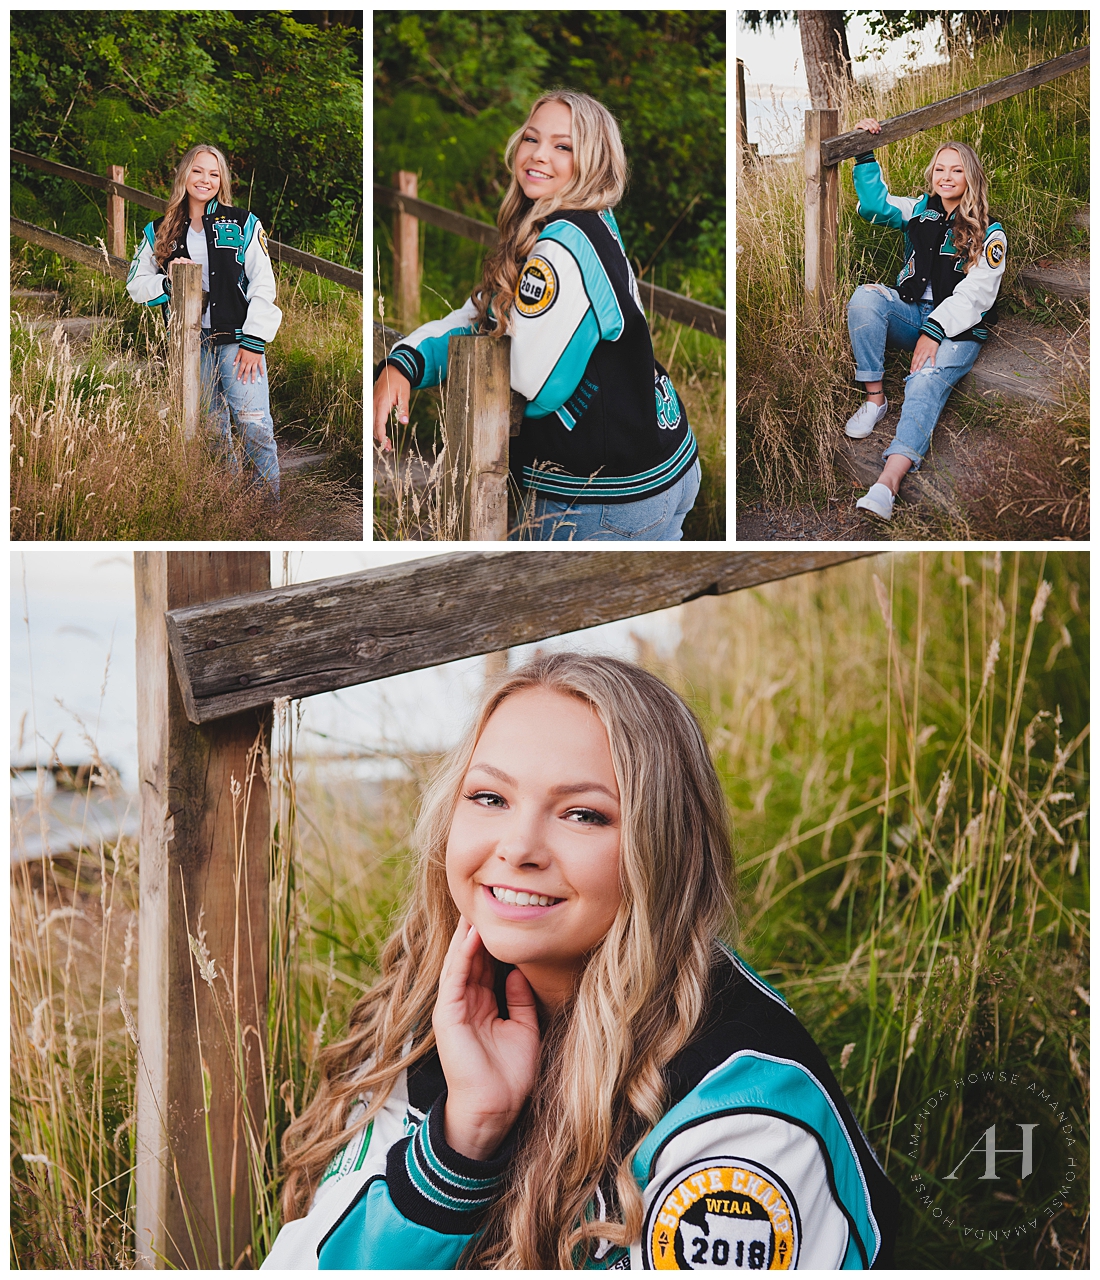 Rustic Fencing for Senior Portraits in Tacoma | How to Style a Rustic Summer Session, Senior Softball Player Portraits | Photographed by the Best Tacoma Senior Photographer Amanda Howse